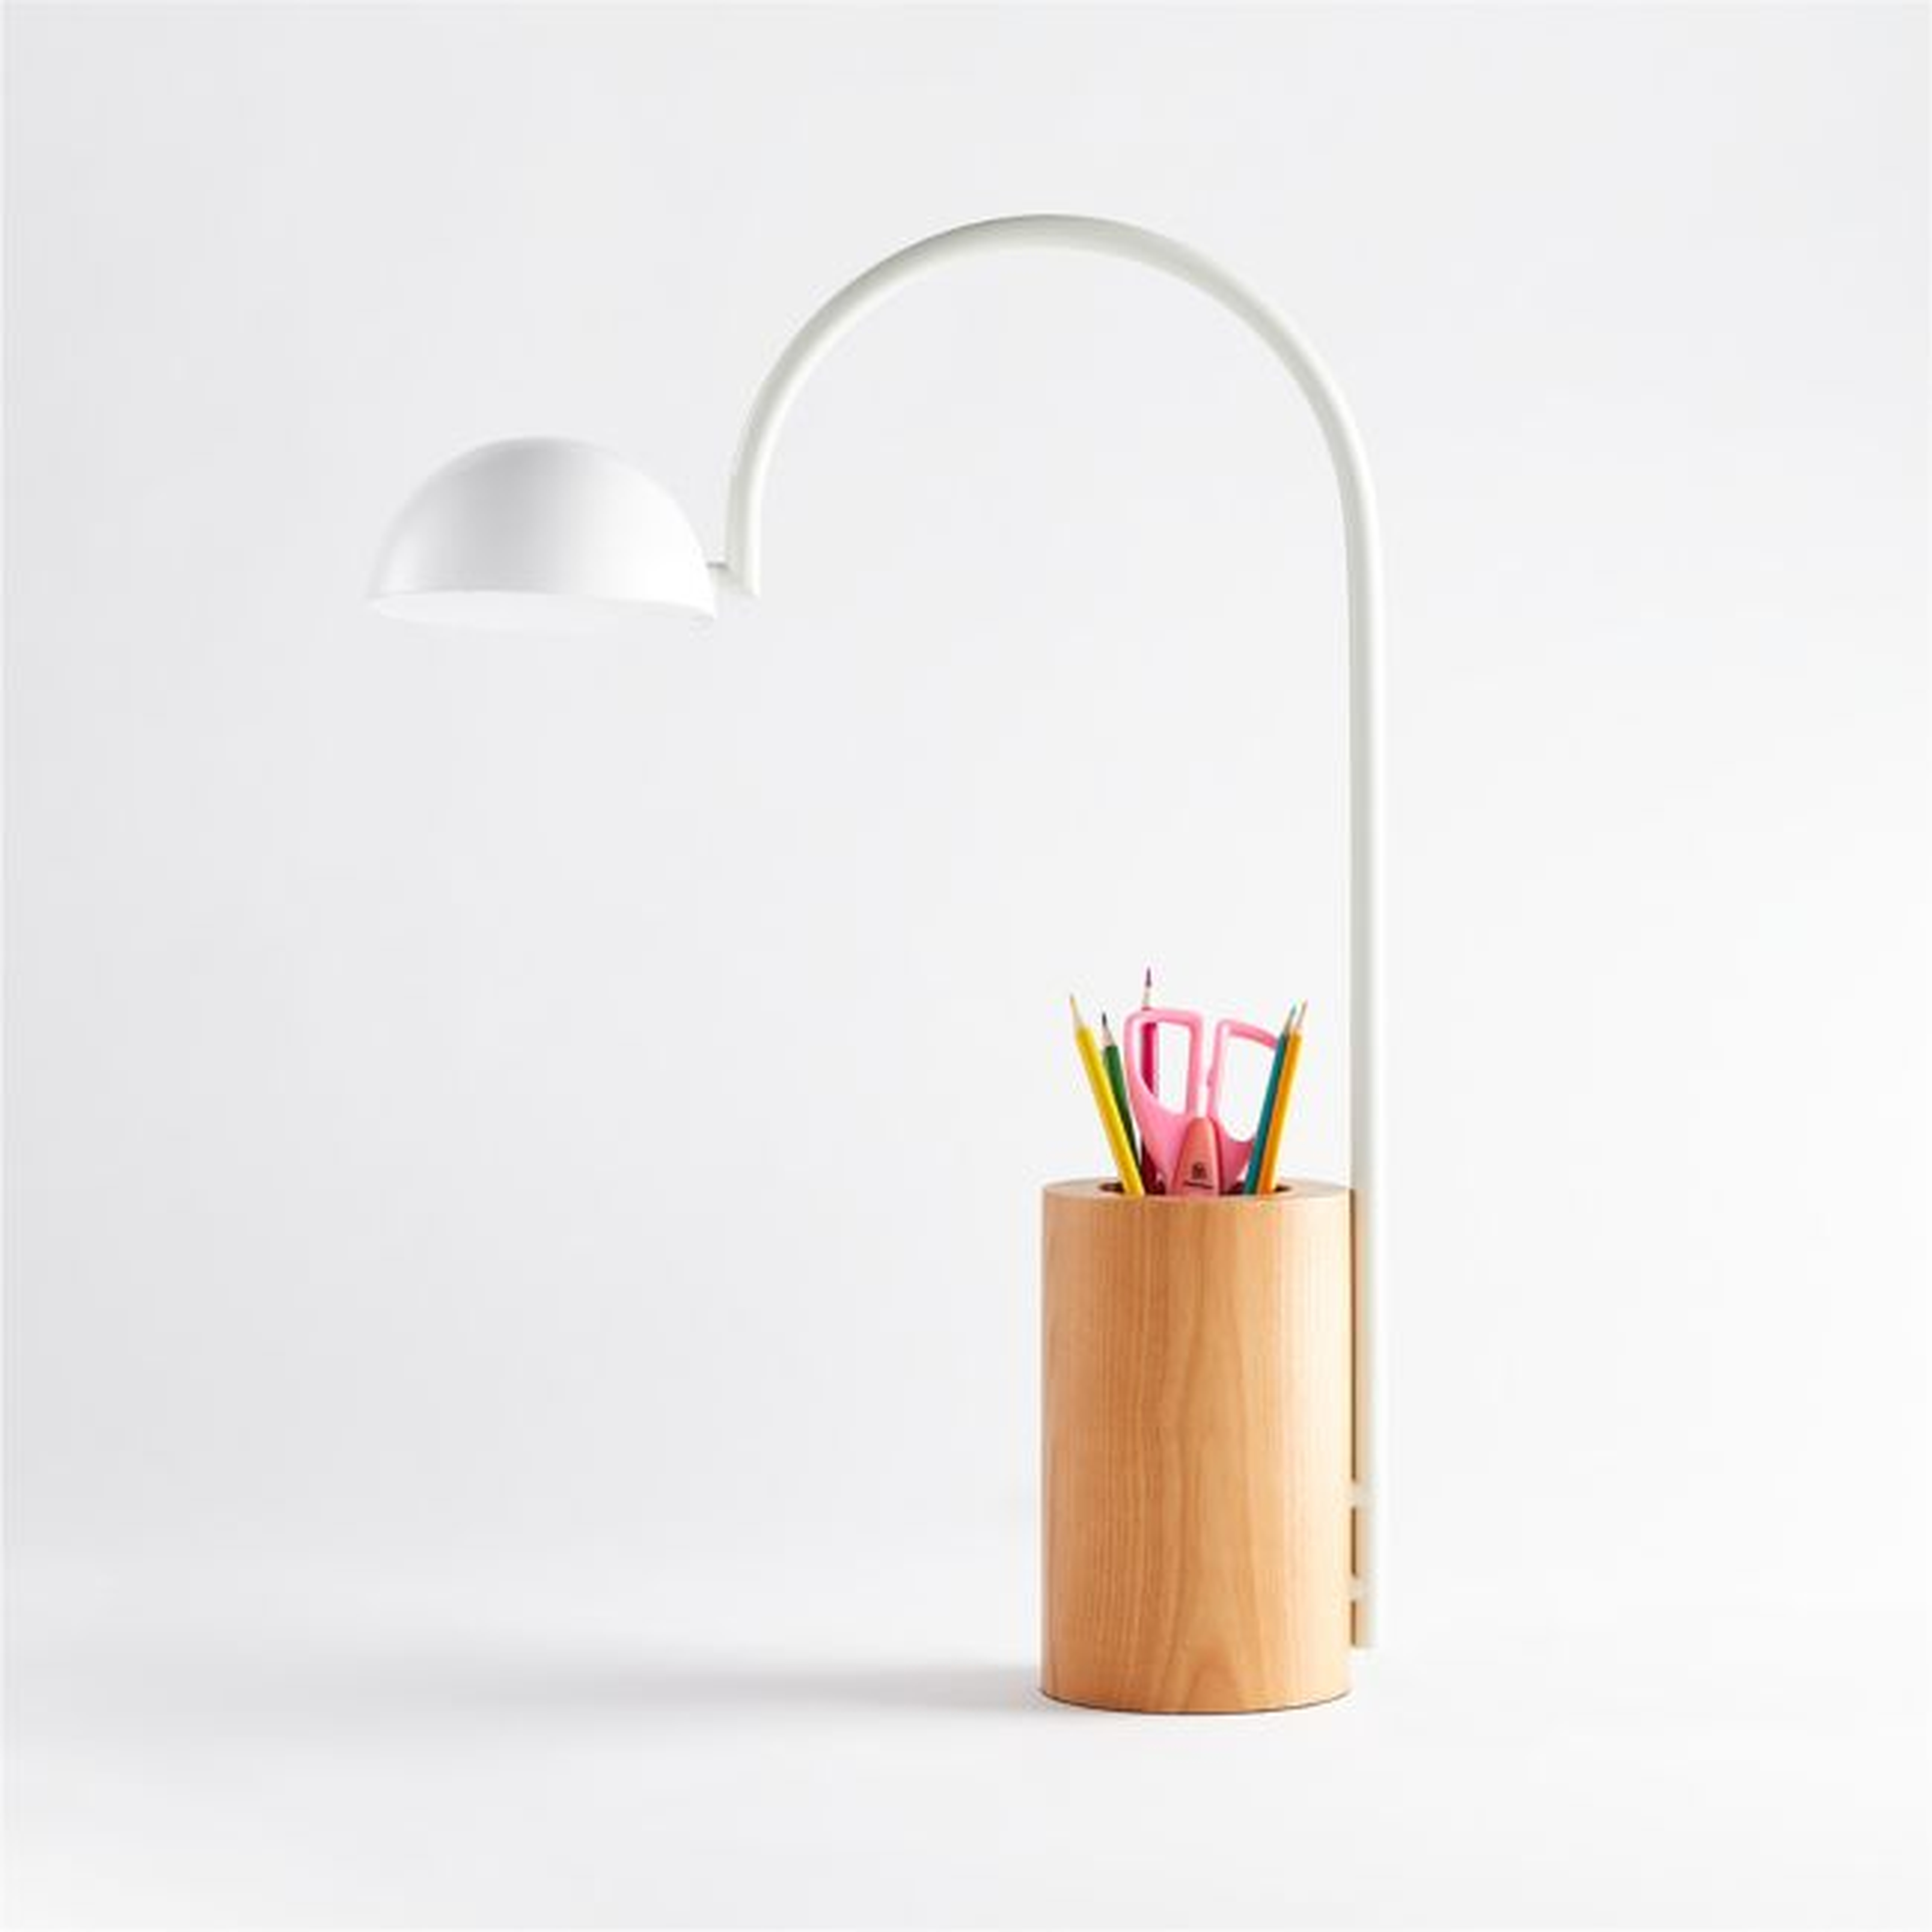 Bug Kids White Desk Lamp with Pencil Cup - Crate and Barrel